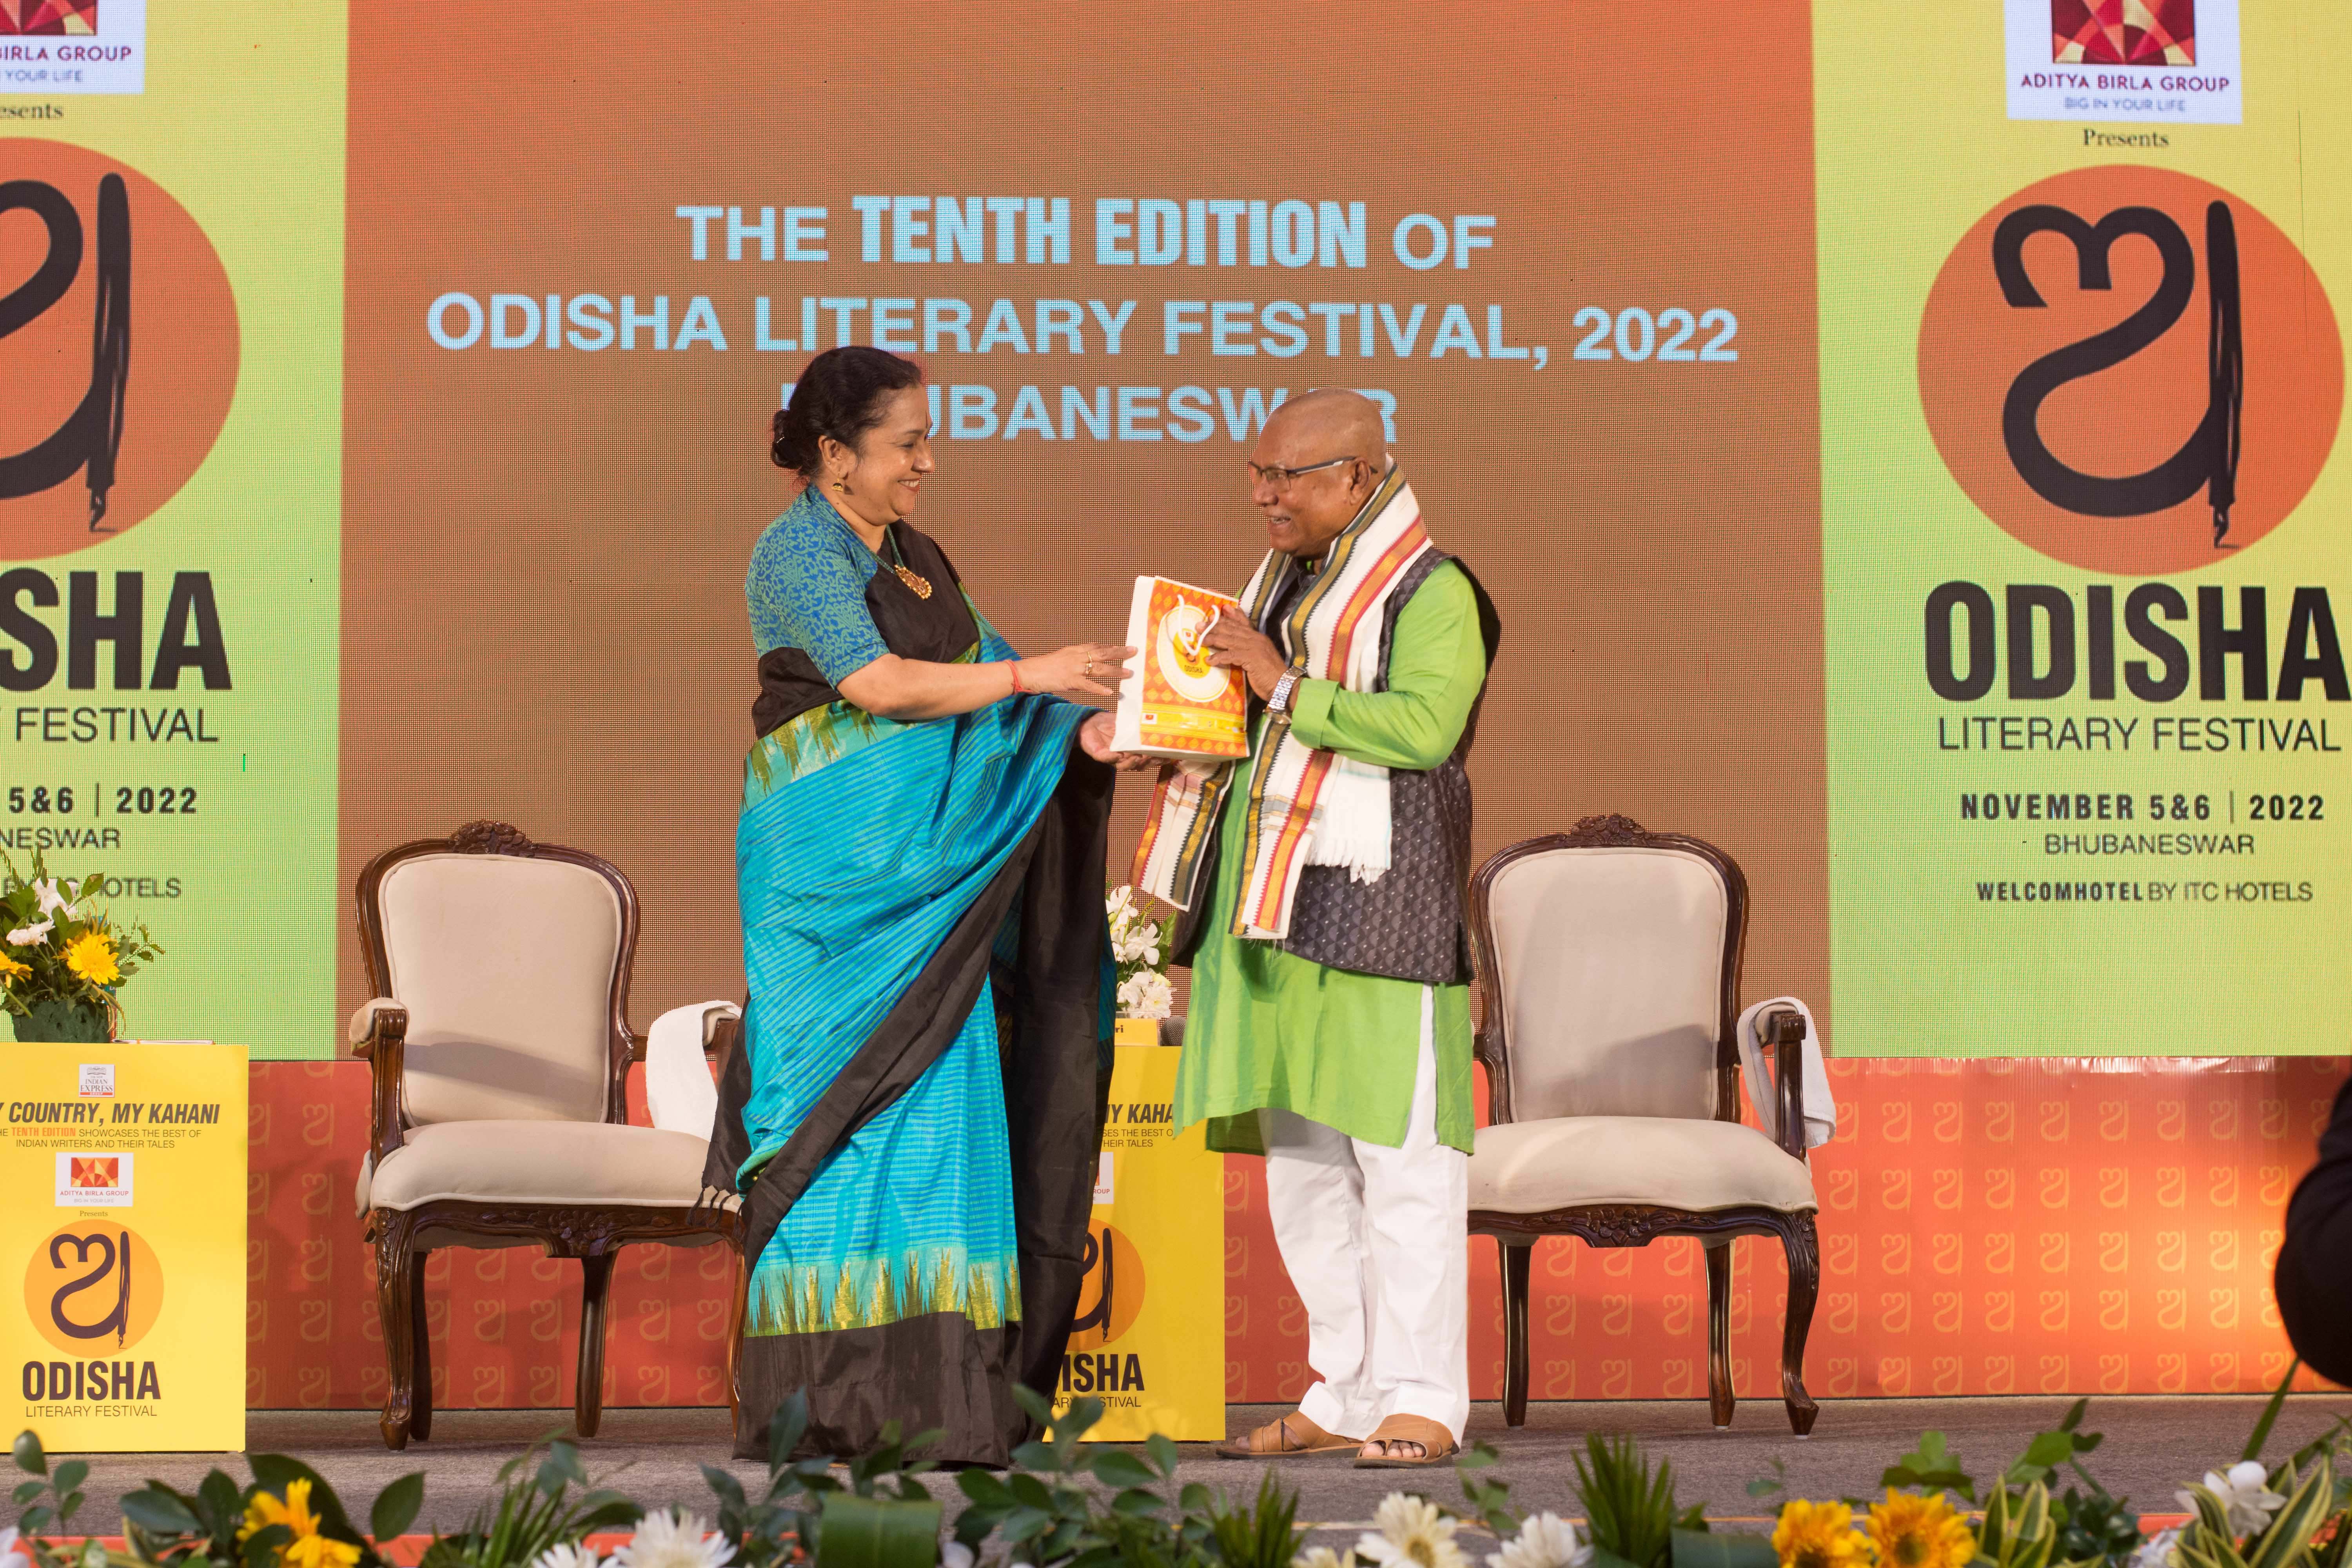 Left to right - TNIE CEO Lakshmi Menon and Manoranjan Byapari, author and politician diring the third session - From Rickshawala to MLA: How I Rewrote My Life, on the first day of Odisha Literary Festival in Bhuabneswar. Express / DEBADATTA MALLICK